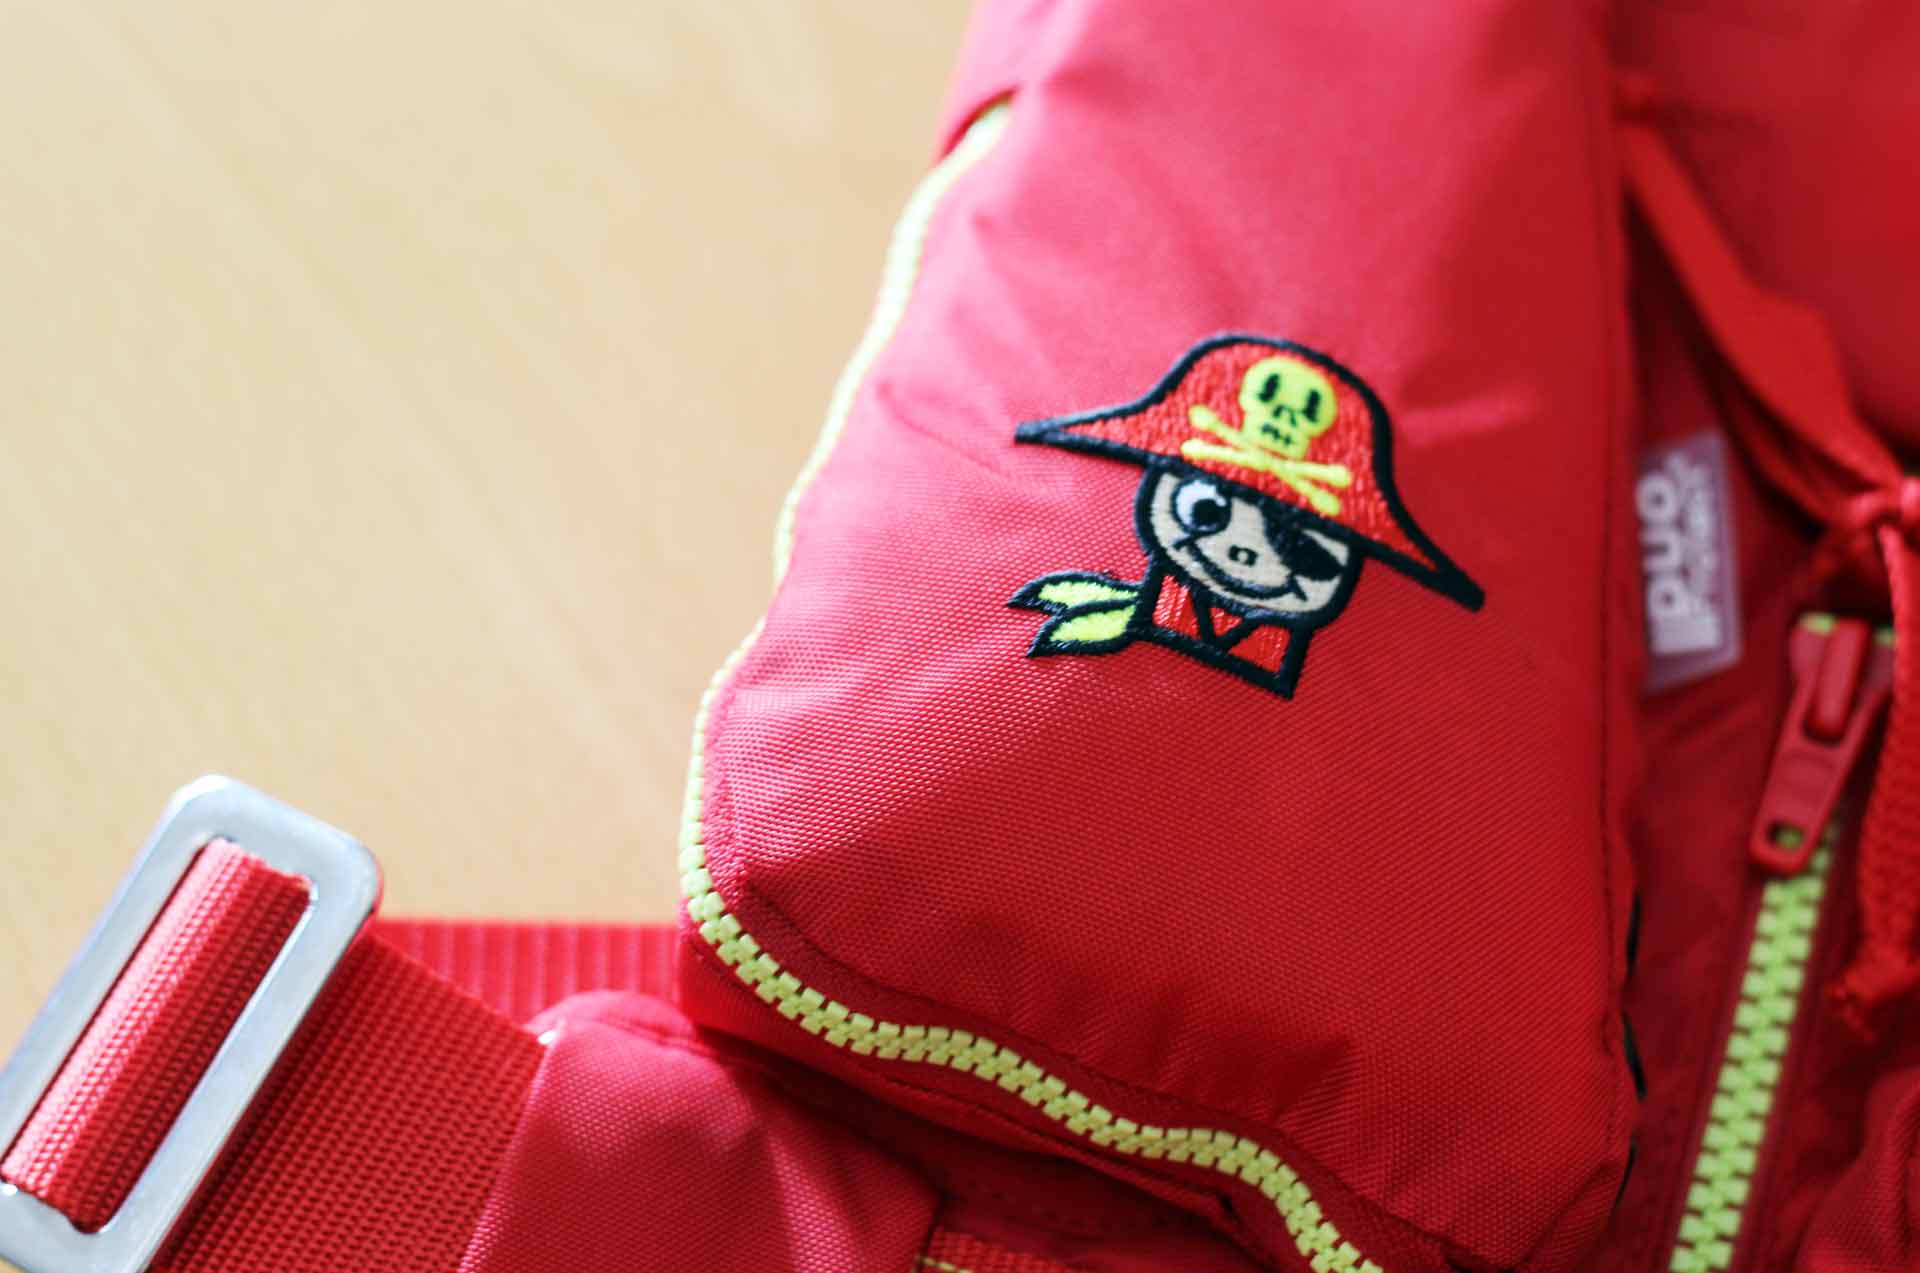 Exclusively for little Pirates: The MINI life jacket by SECUMAR